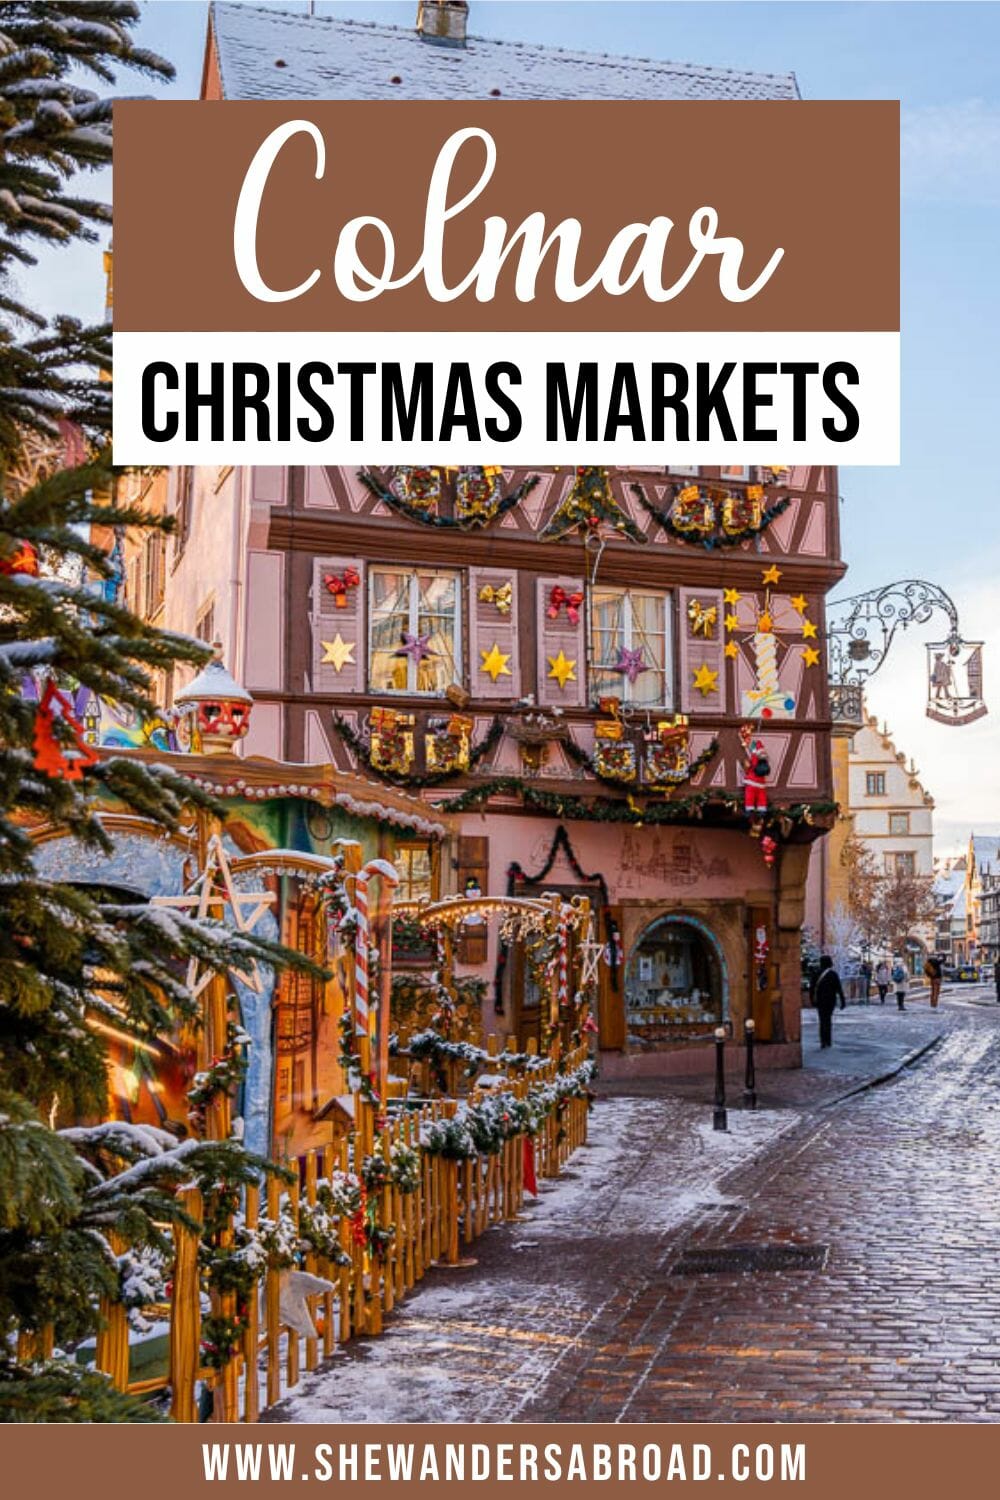 Colmar Christmas Markets: How to Celebrate Christmas in Colmar